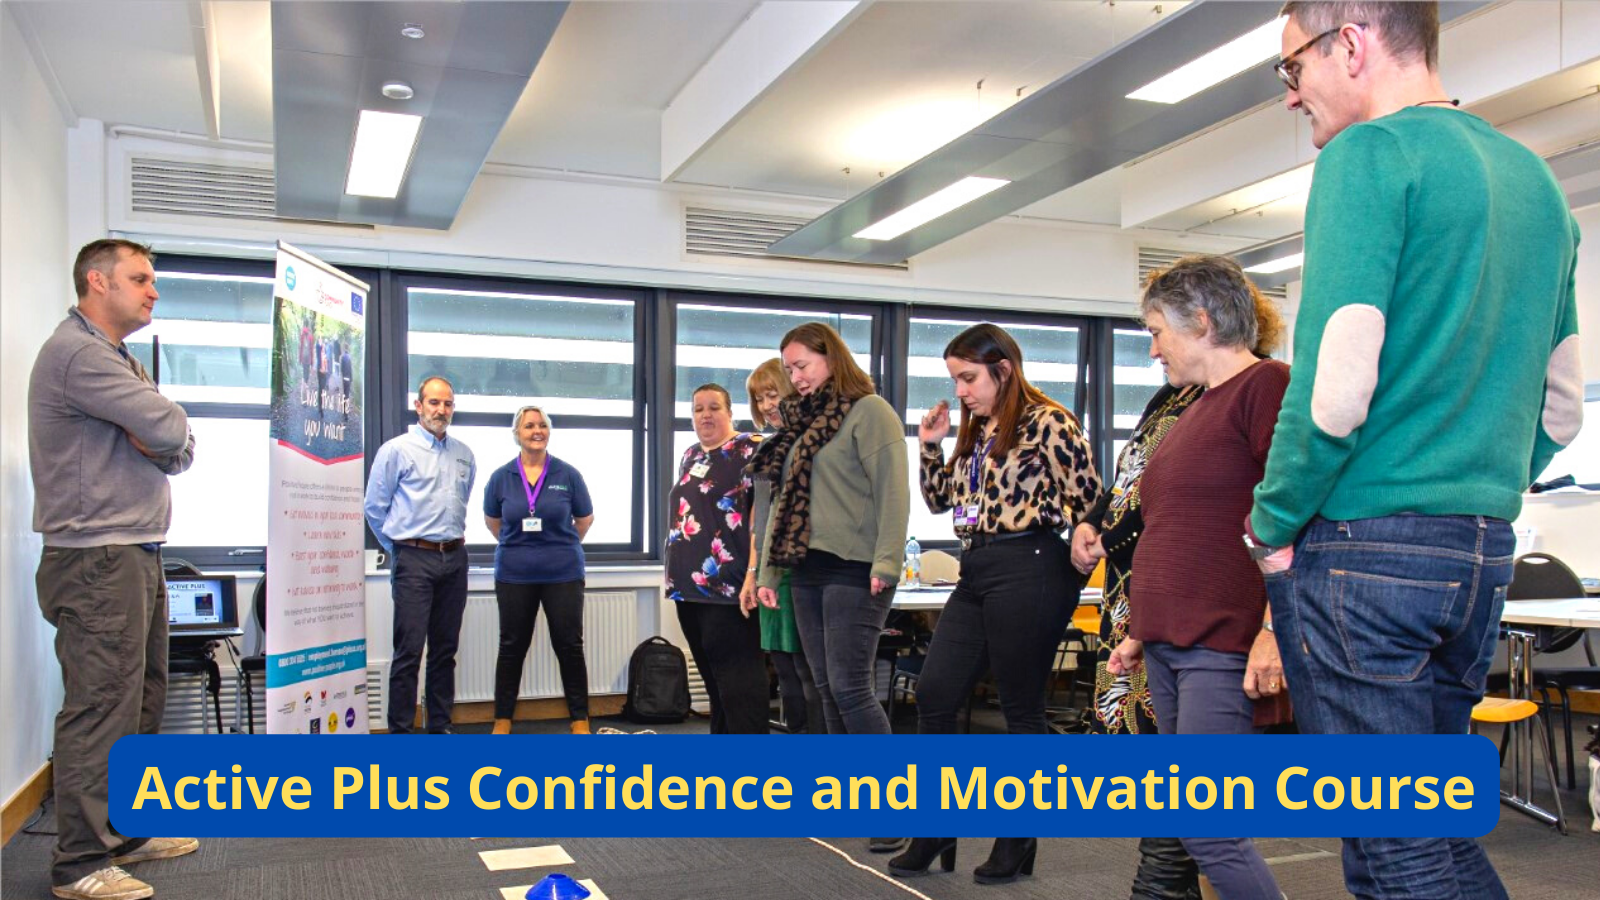 Confidence and motivation course